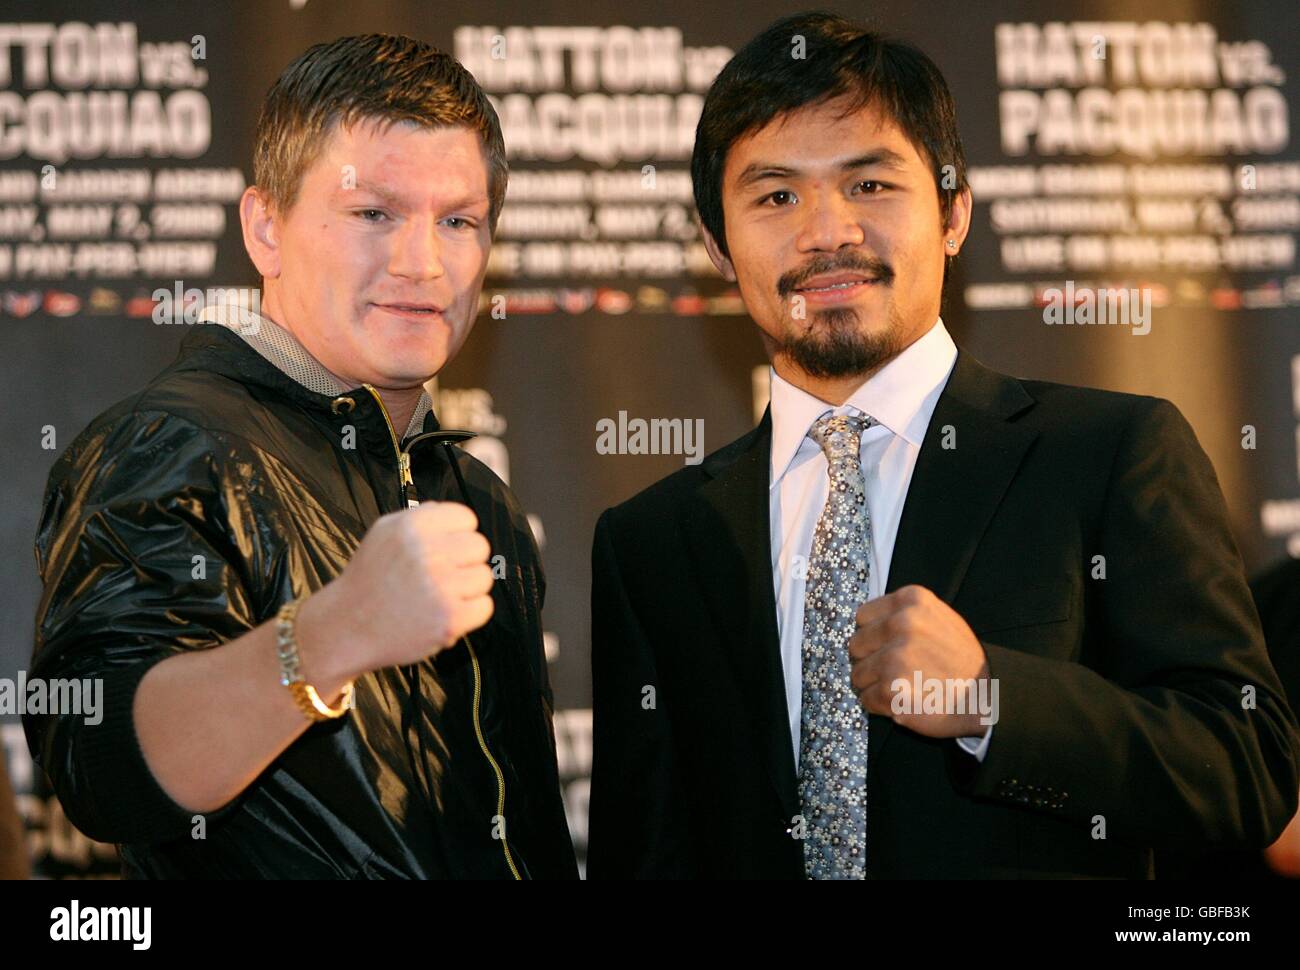 Boxing - Ricky Hatton v Manny Pacquiao Press Event - Manchester Stock Photo